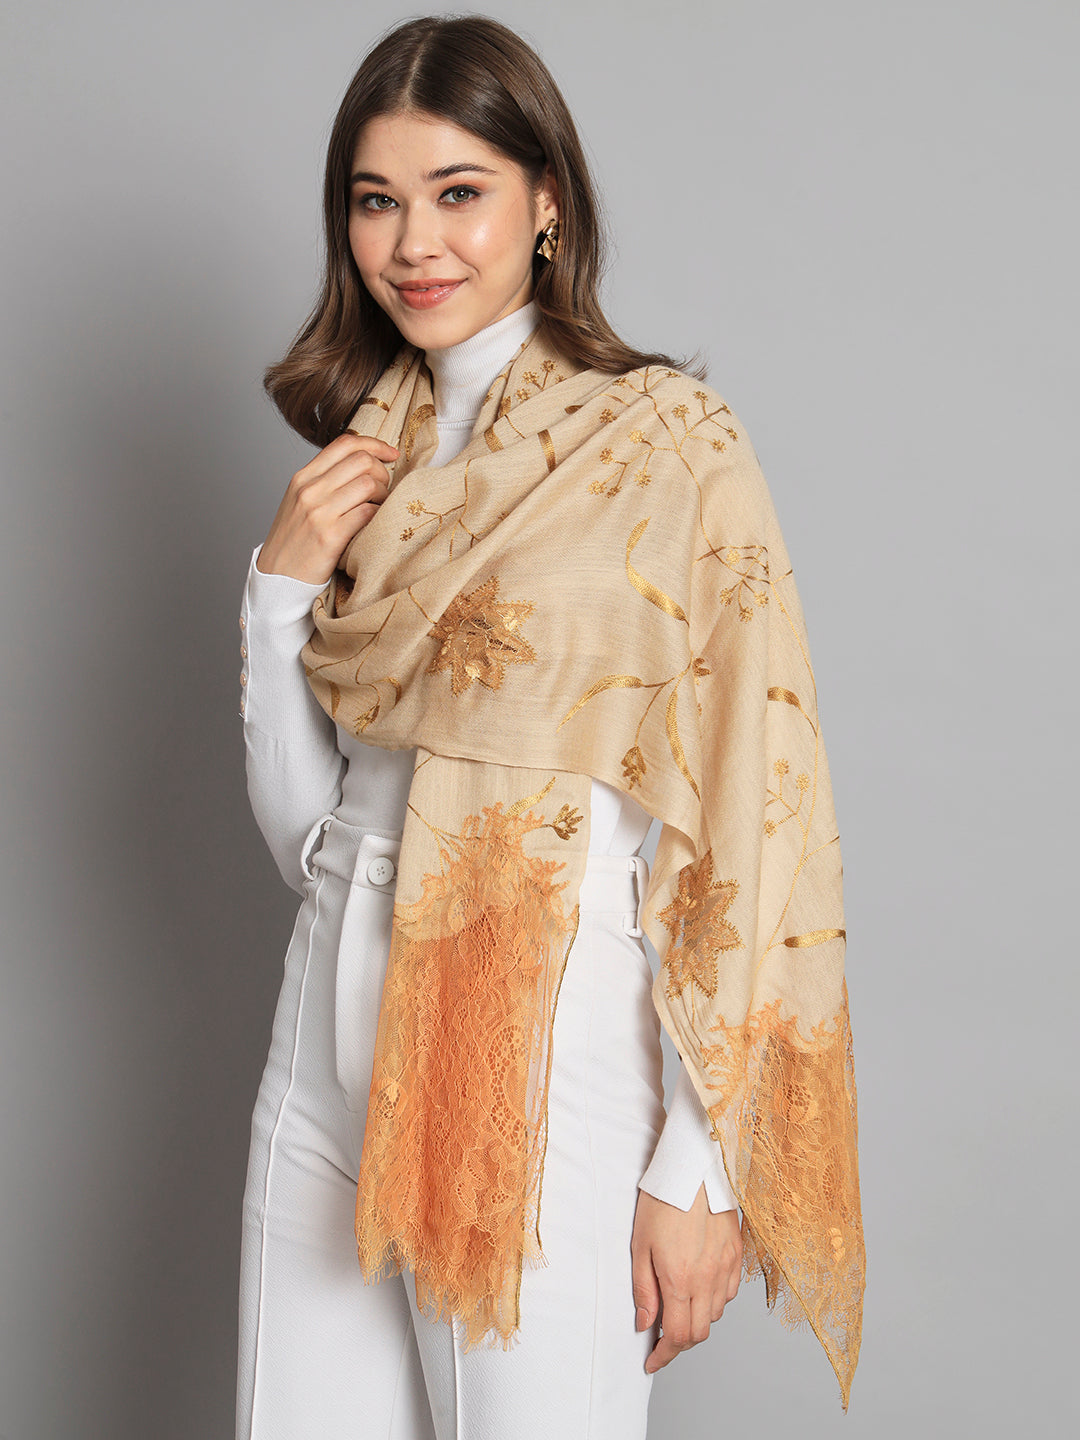 lace shawl, winter scarves for women